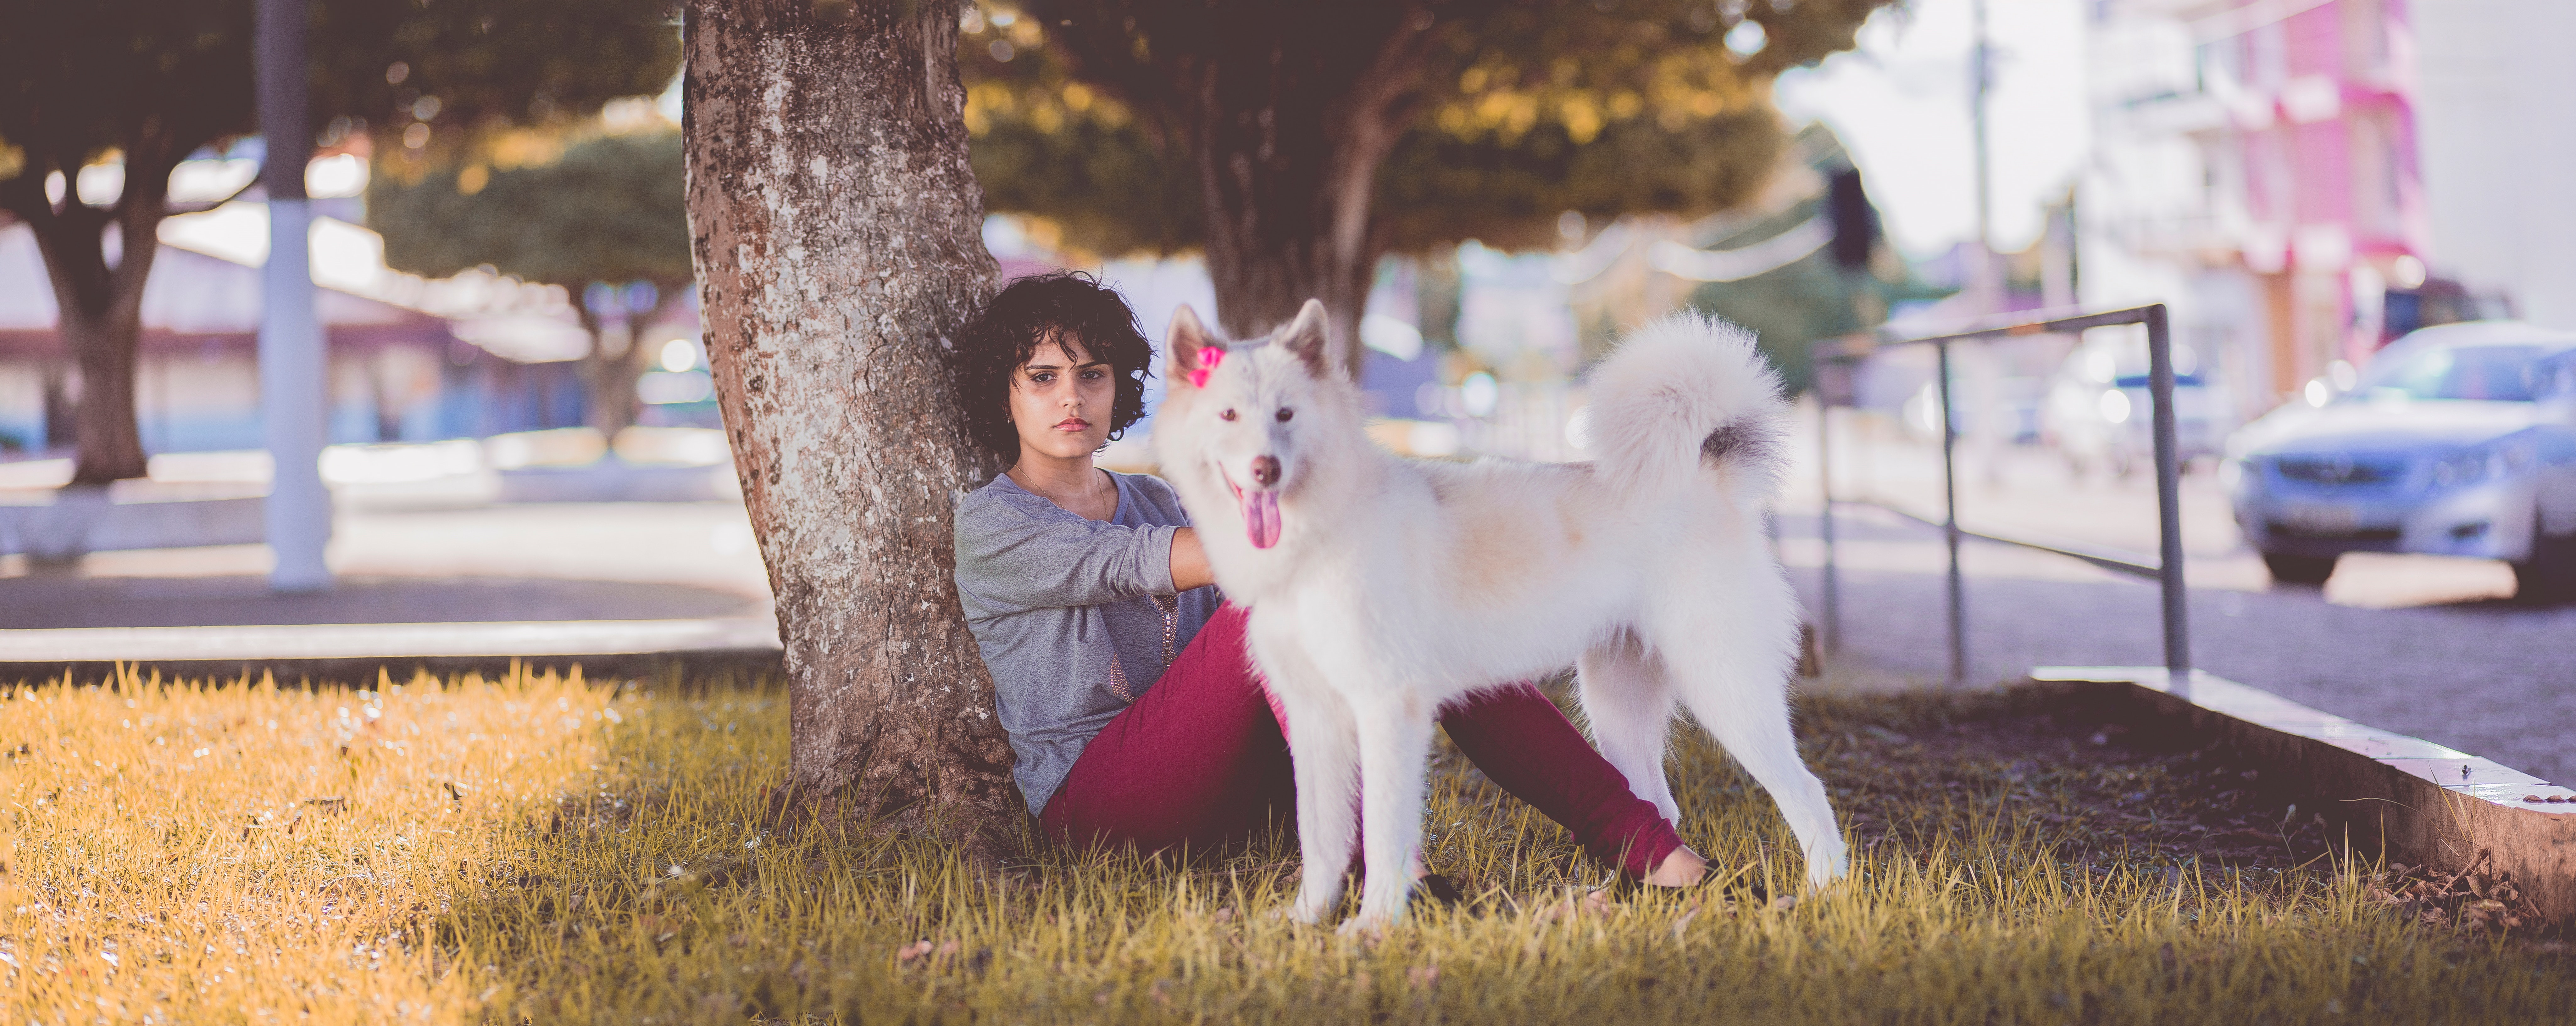 Woman in gray long sleeve top and red pants sitting beside tree and white medium coated dog photo